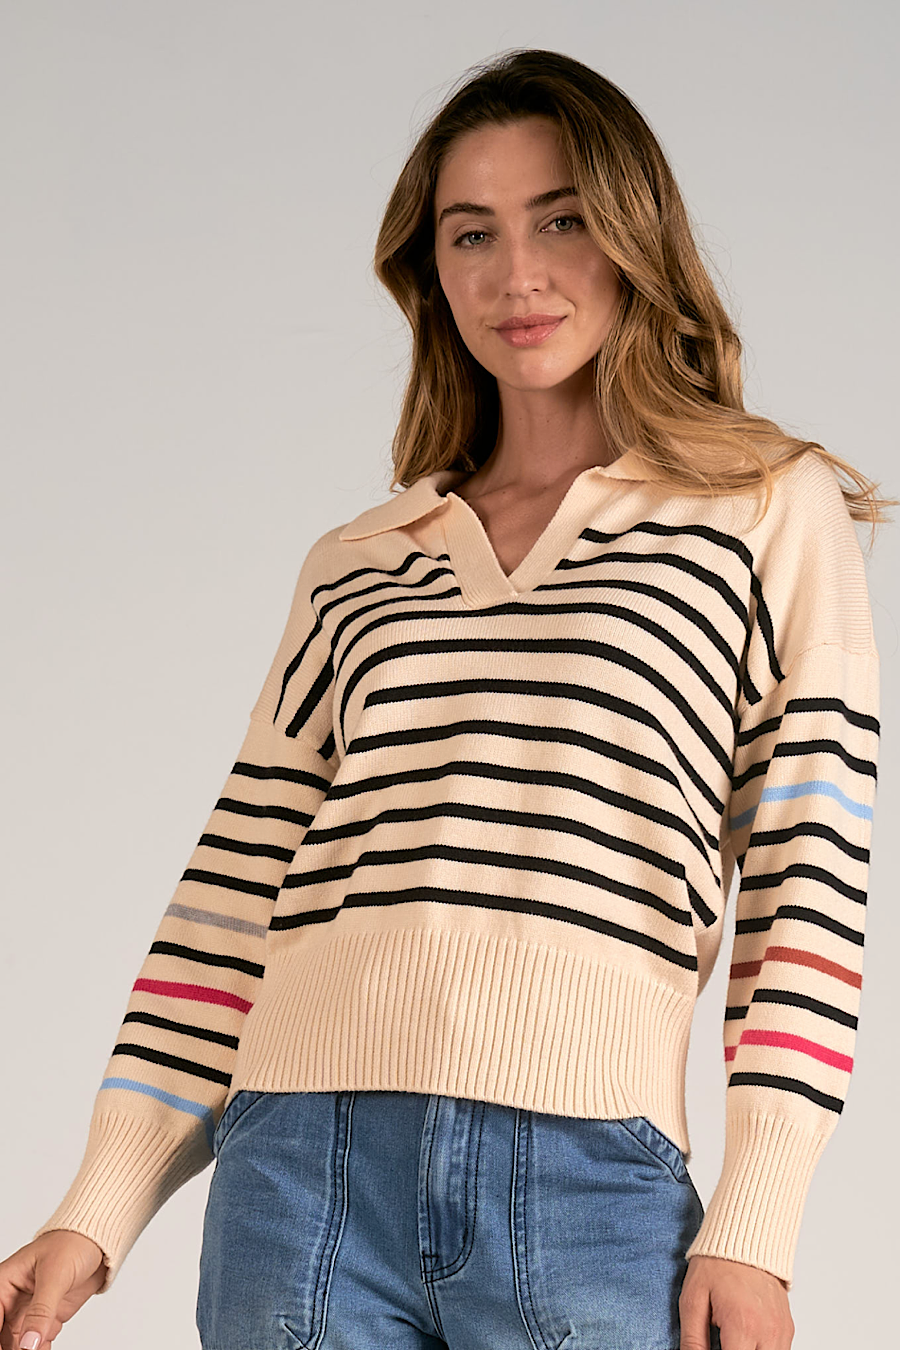 Beckford Striped Collared Sweater